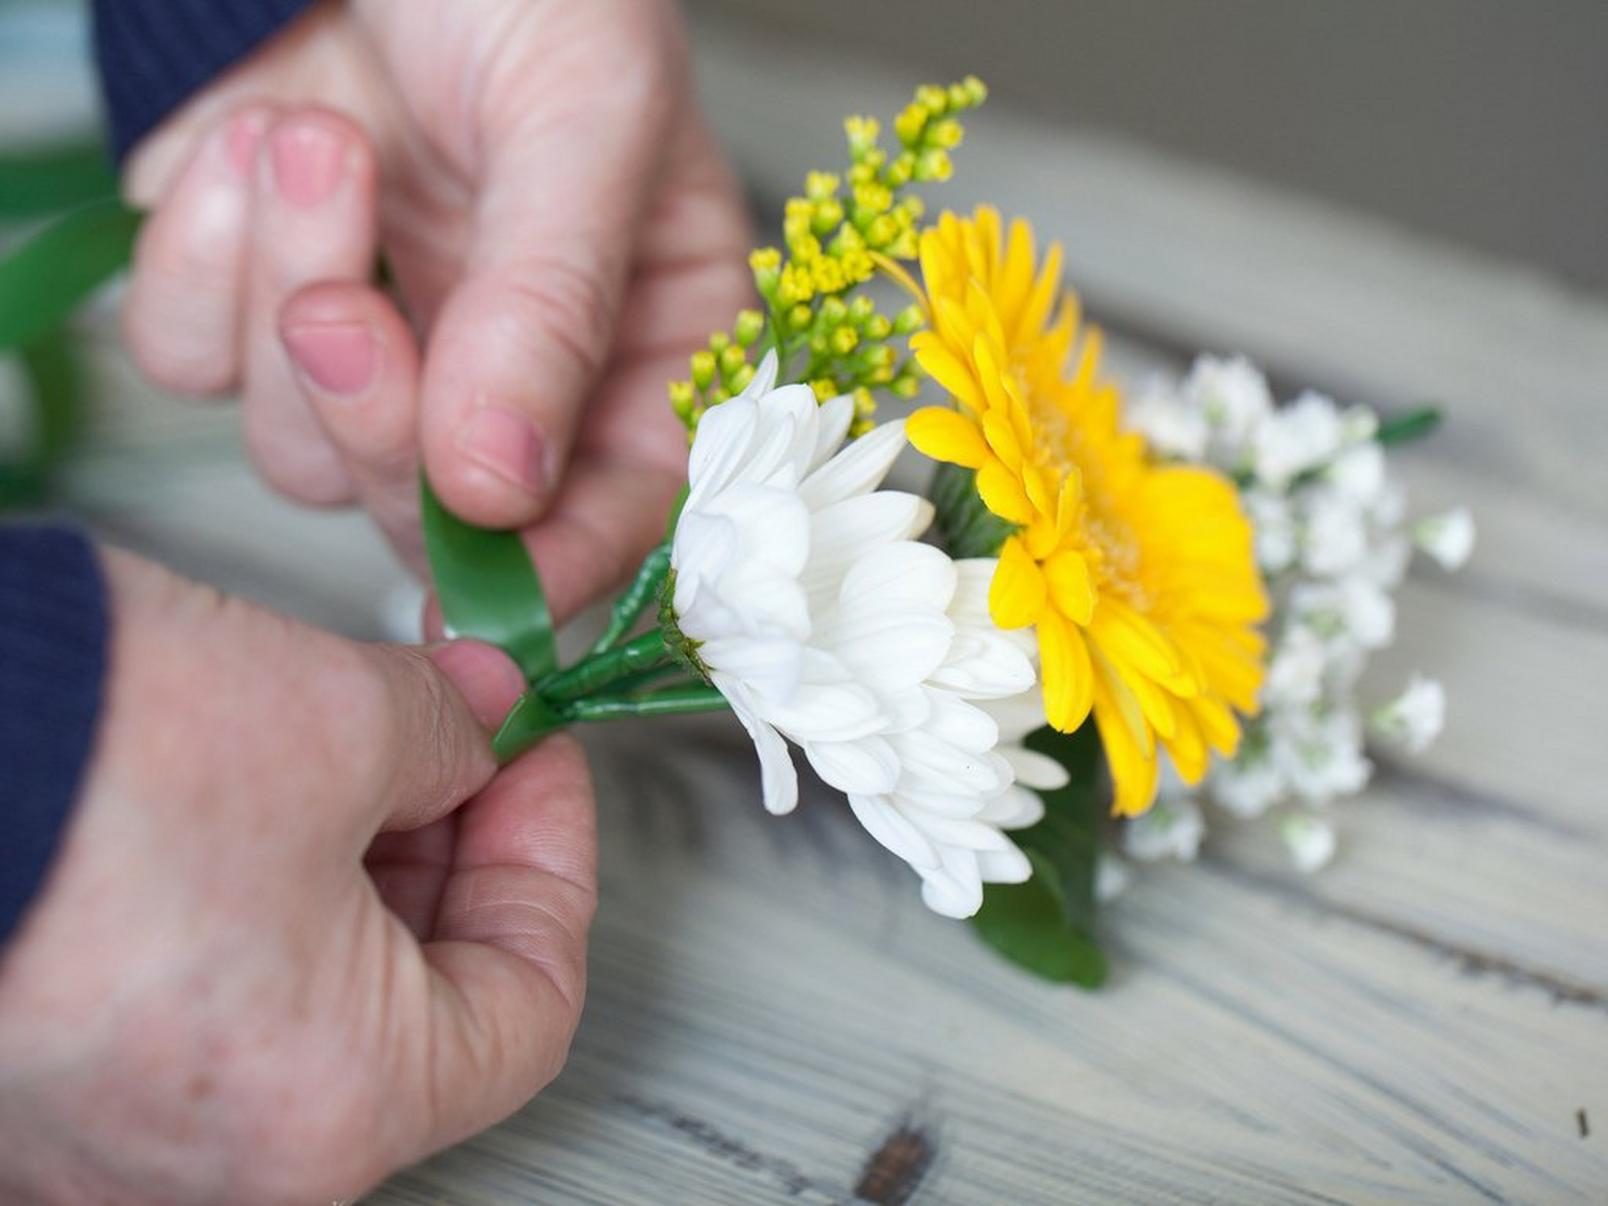 how-to-make-a-flower-crown-attaching-flowers-and-leaves-together